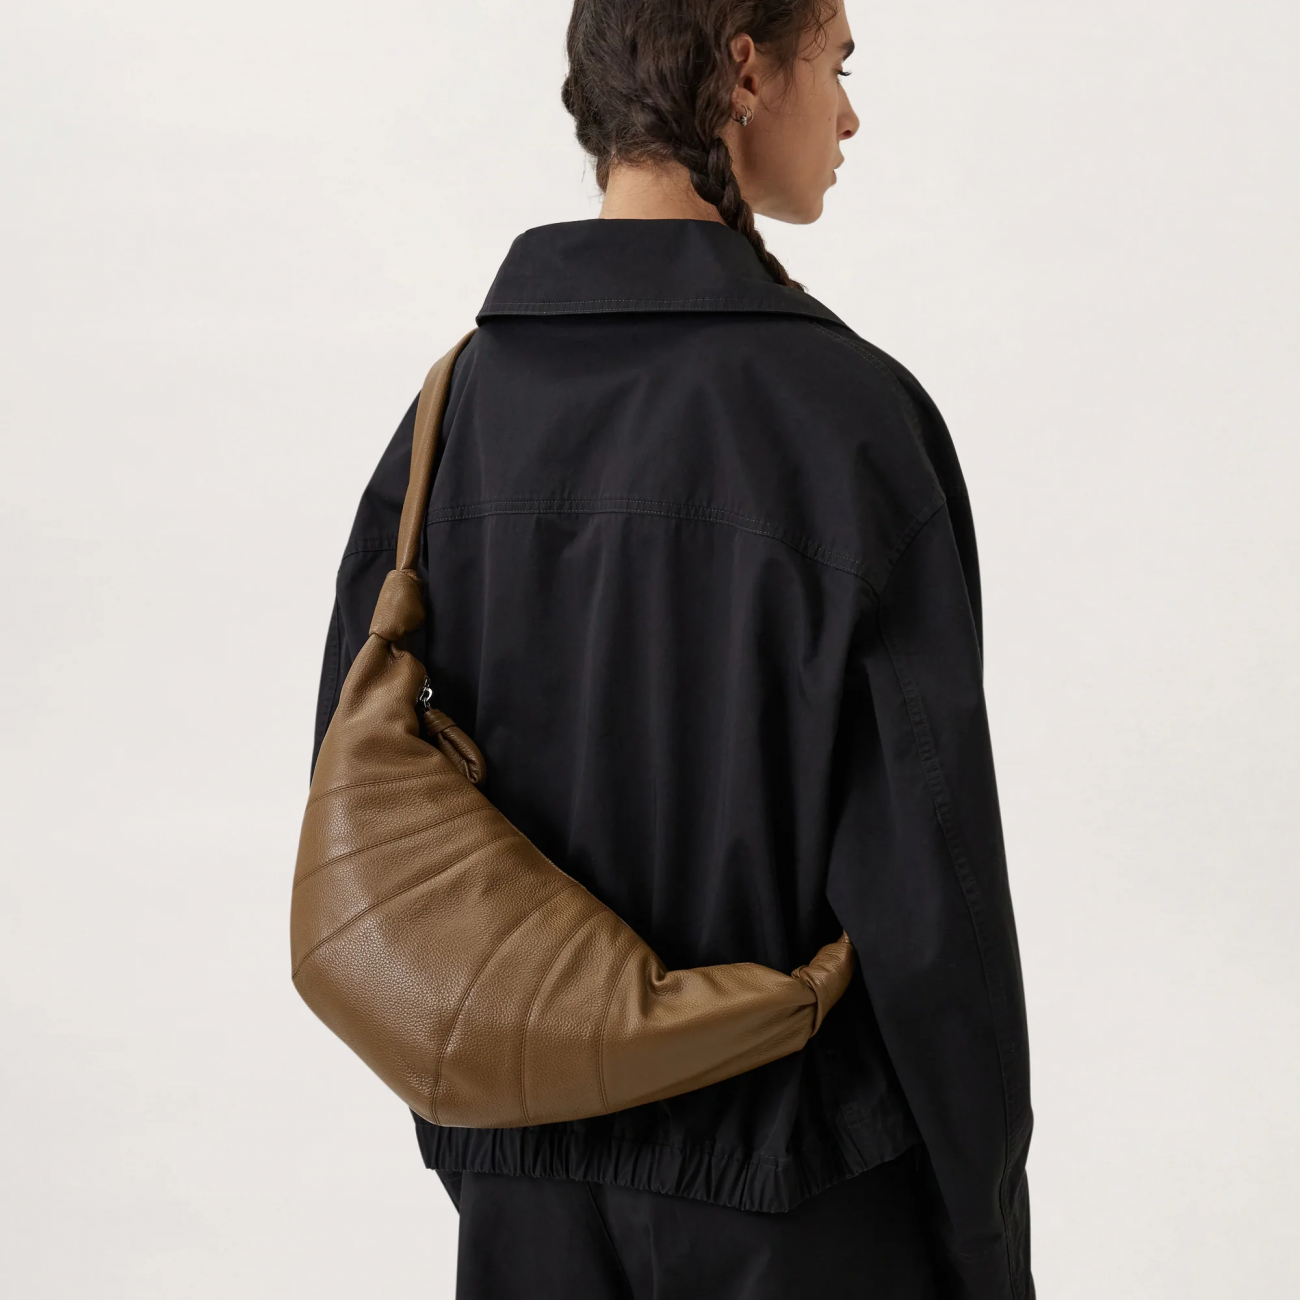 MEDIUM CROISSANT BAG - SOFT GRAINED LEATHER - OLIVE BROWN